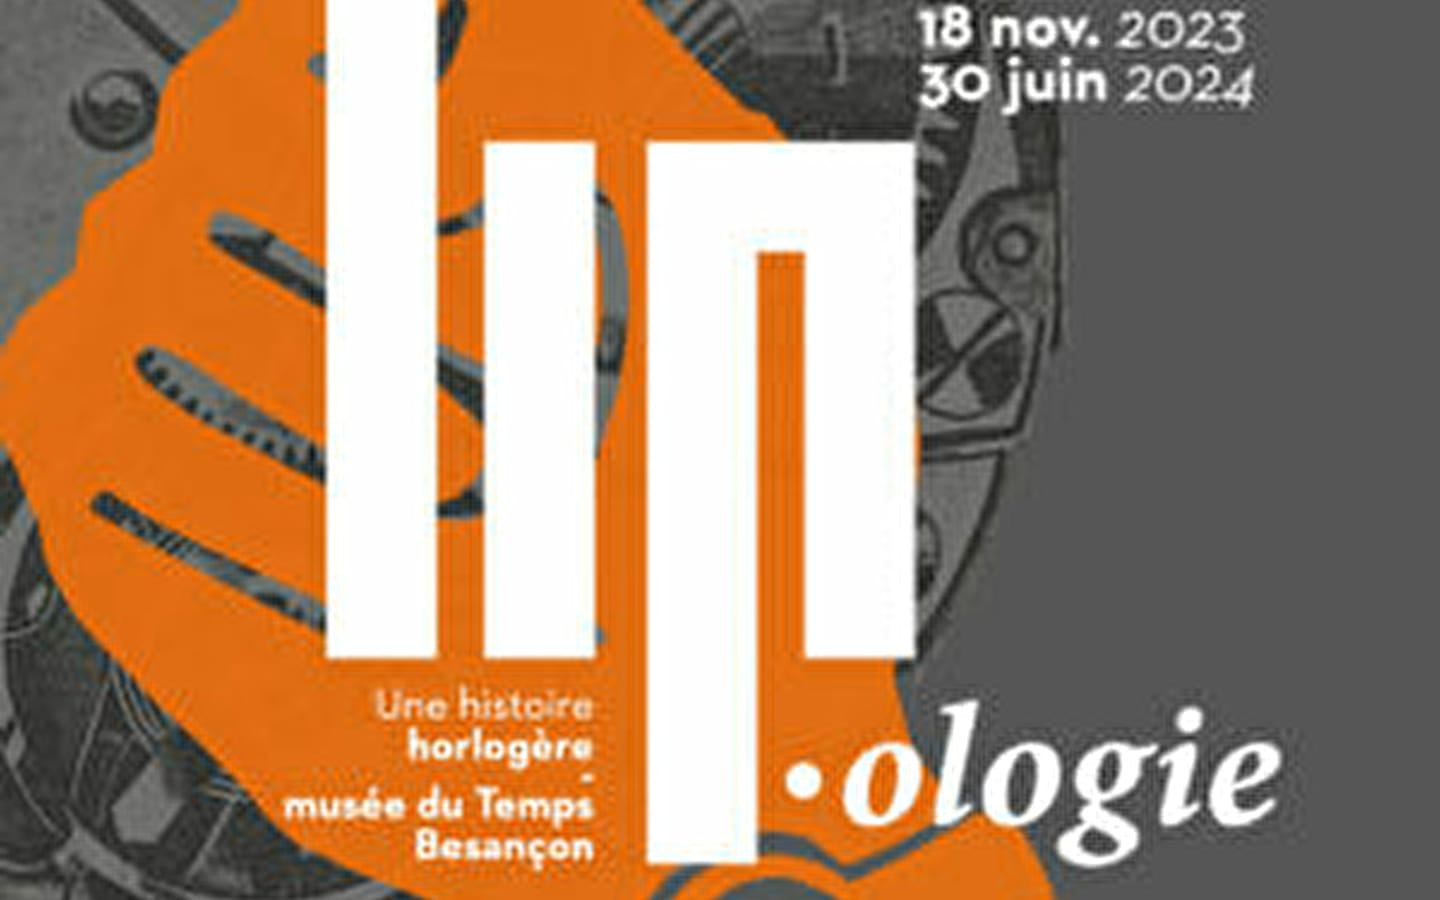 Exhibition 'LIP.ologie. A watchmaking history' exhibition